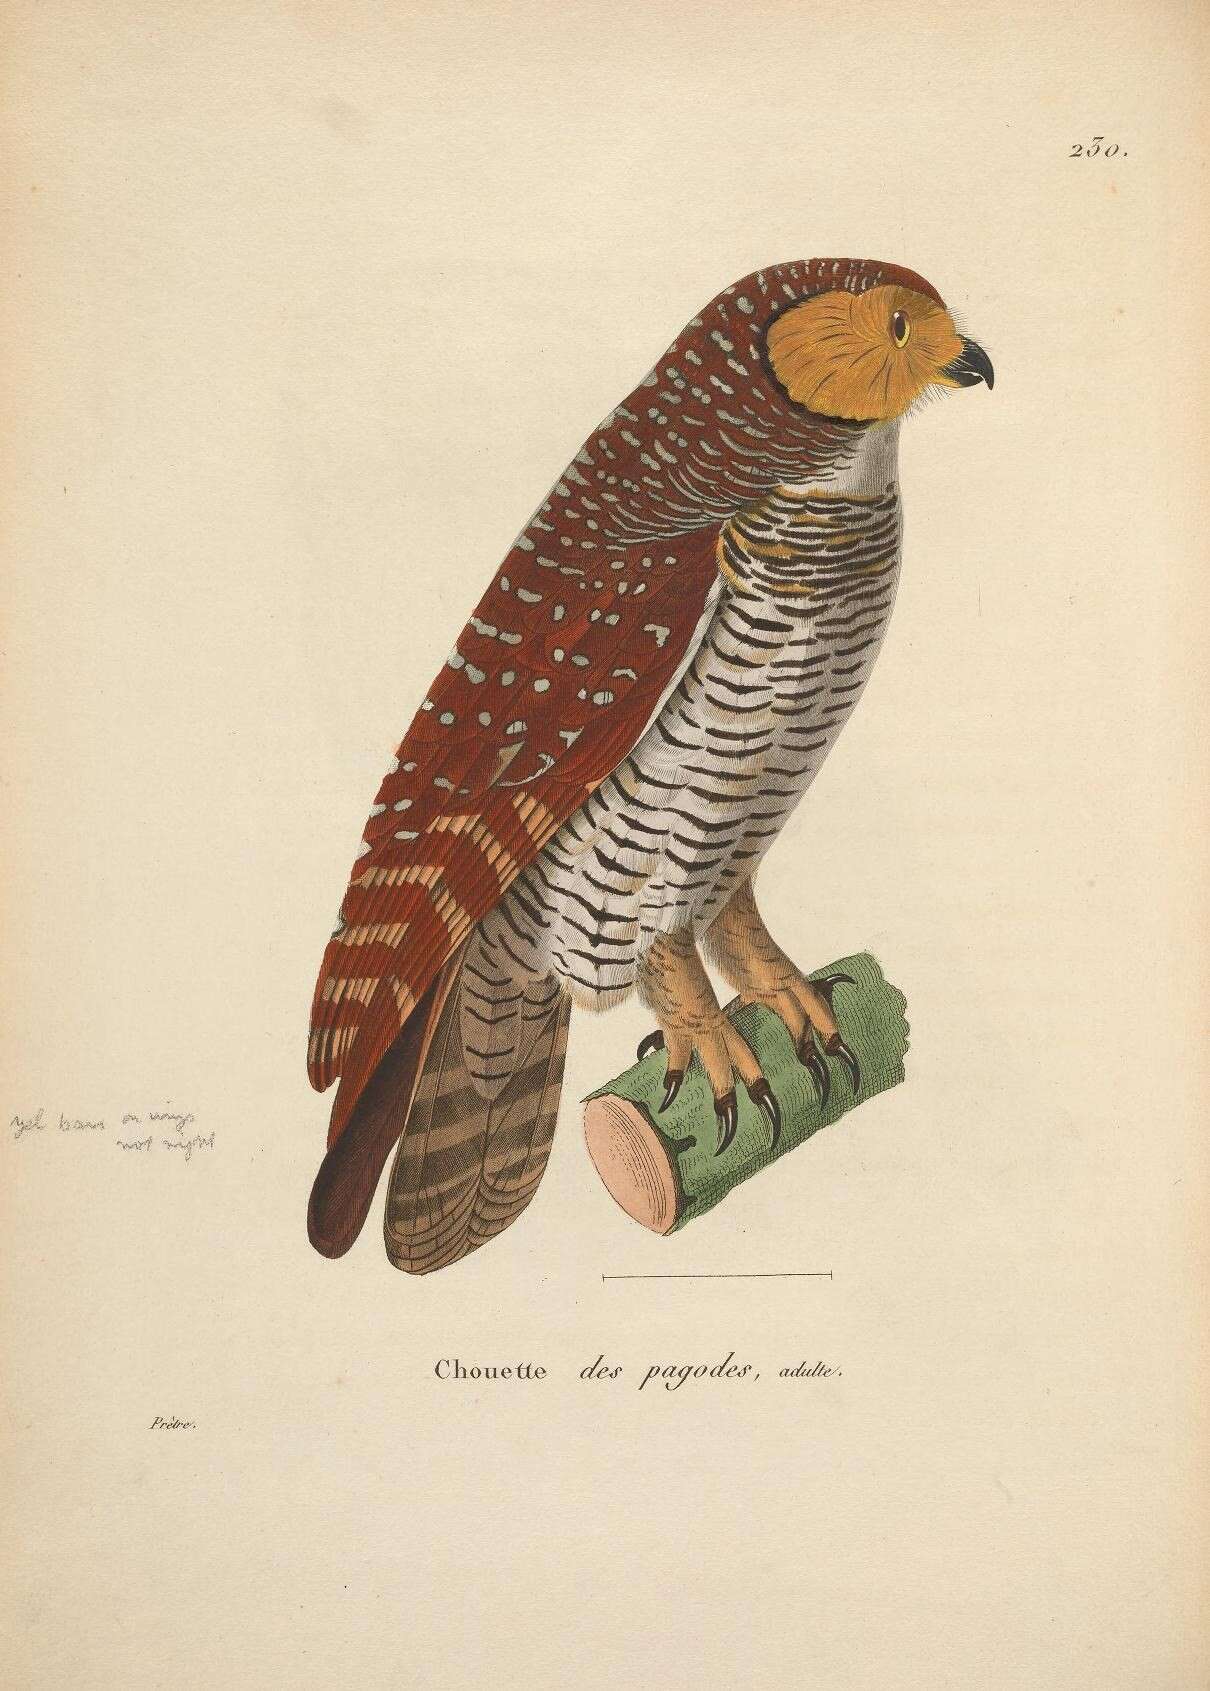 Image of Spotted Wood Owl